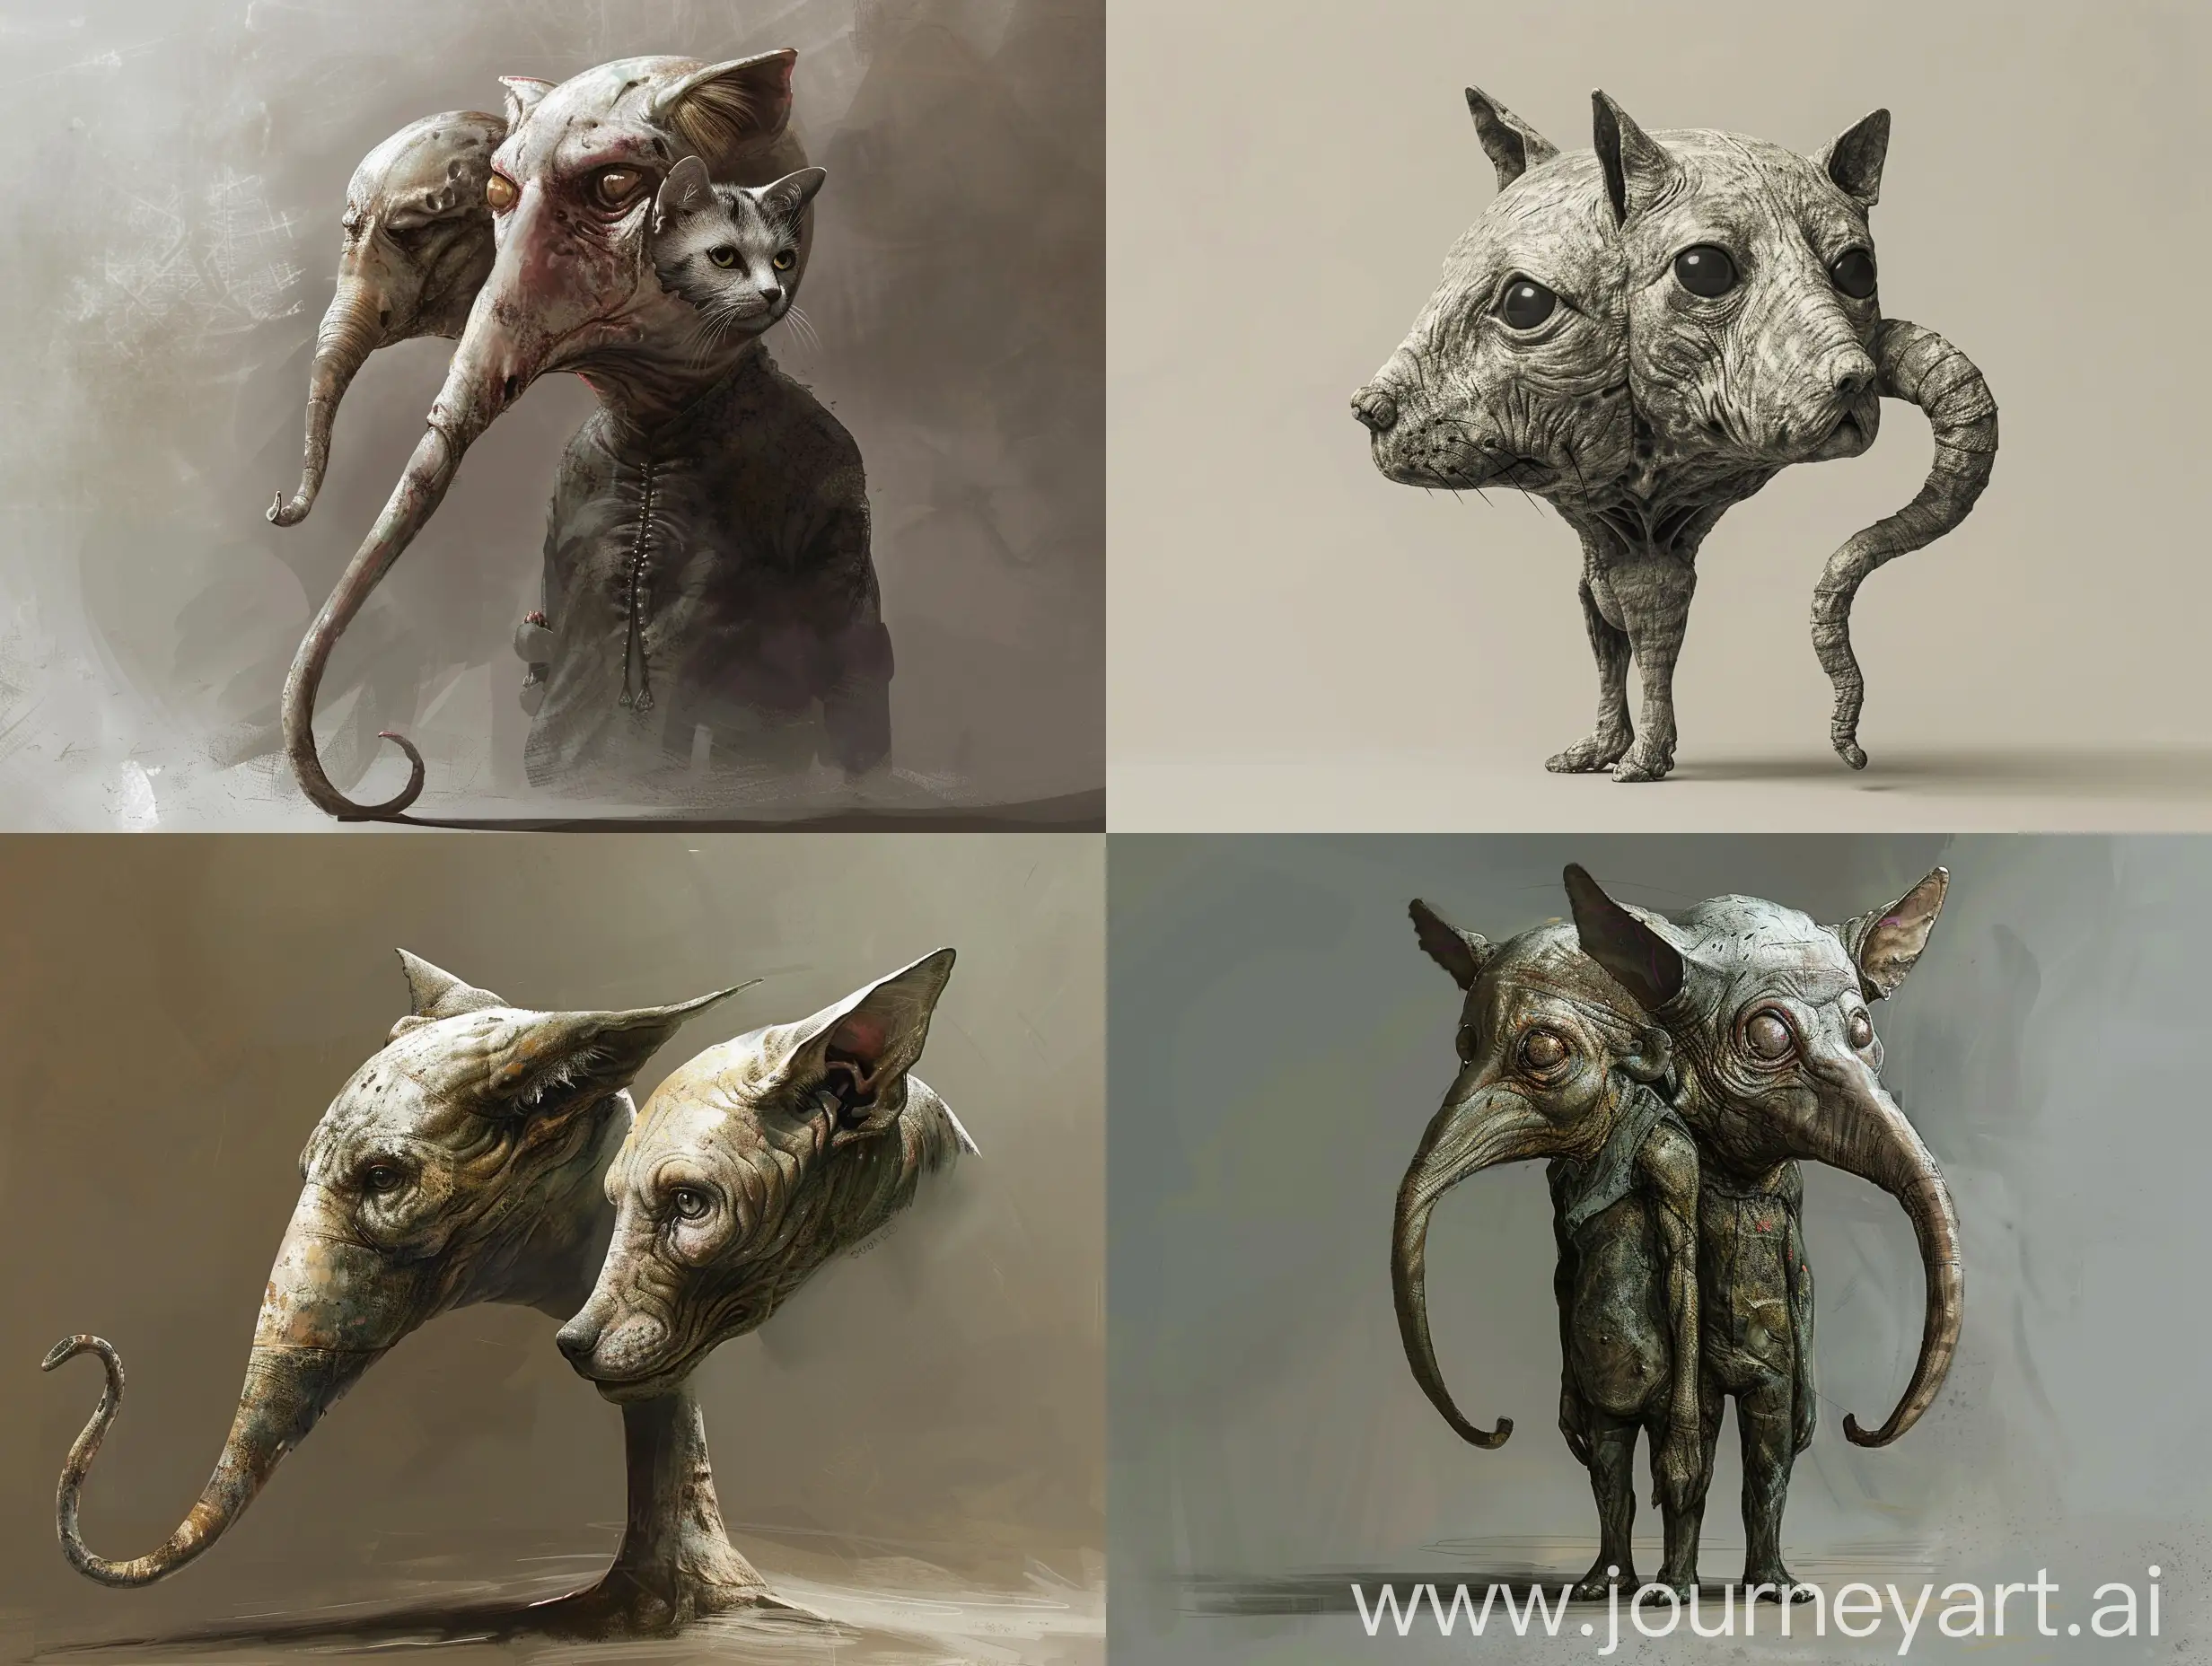 Fantasy-Creature-with-Unique-Dual-Heads-Cat-and-Dog